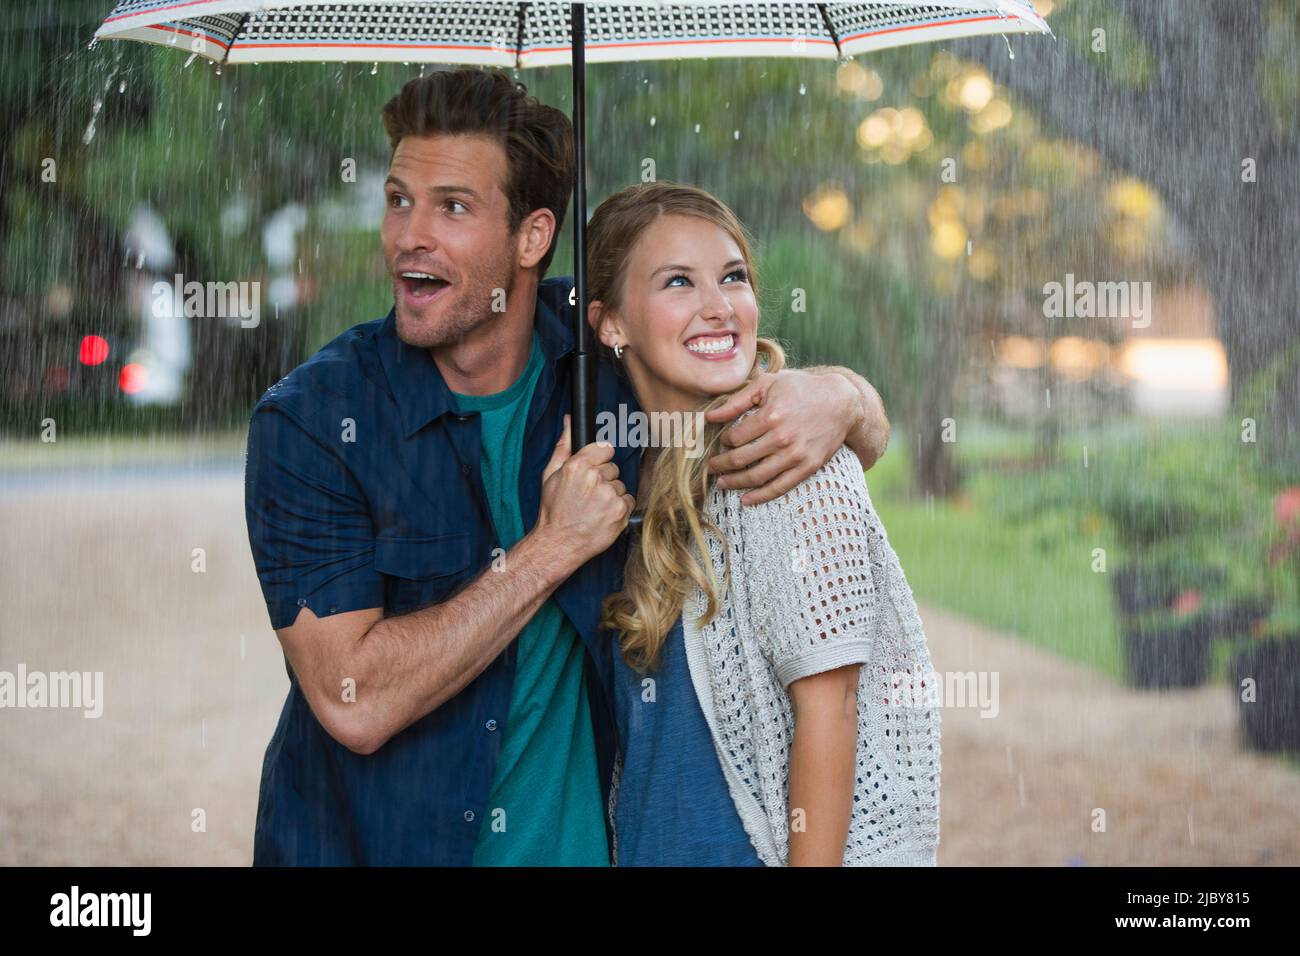 Young couple walking through park with umbrella in the rain, both looking out at the falling rain Stock Photo